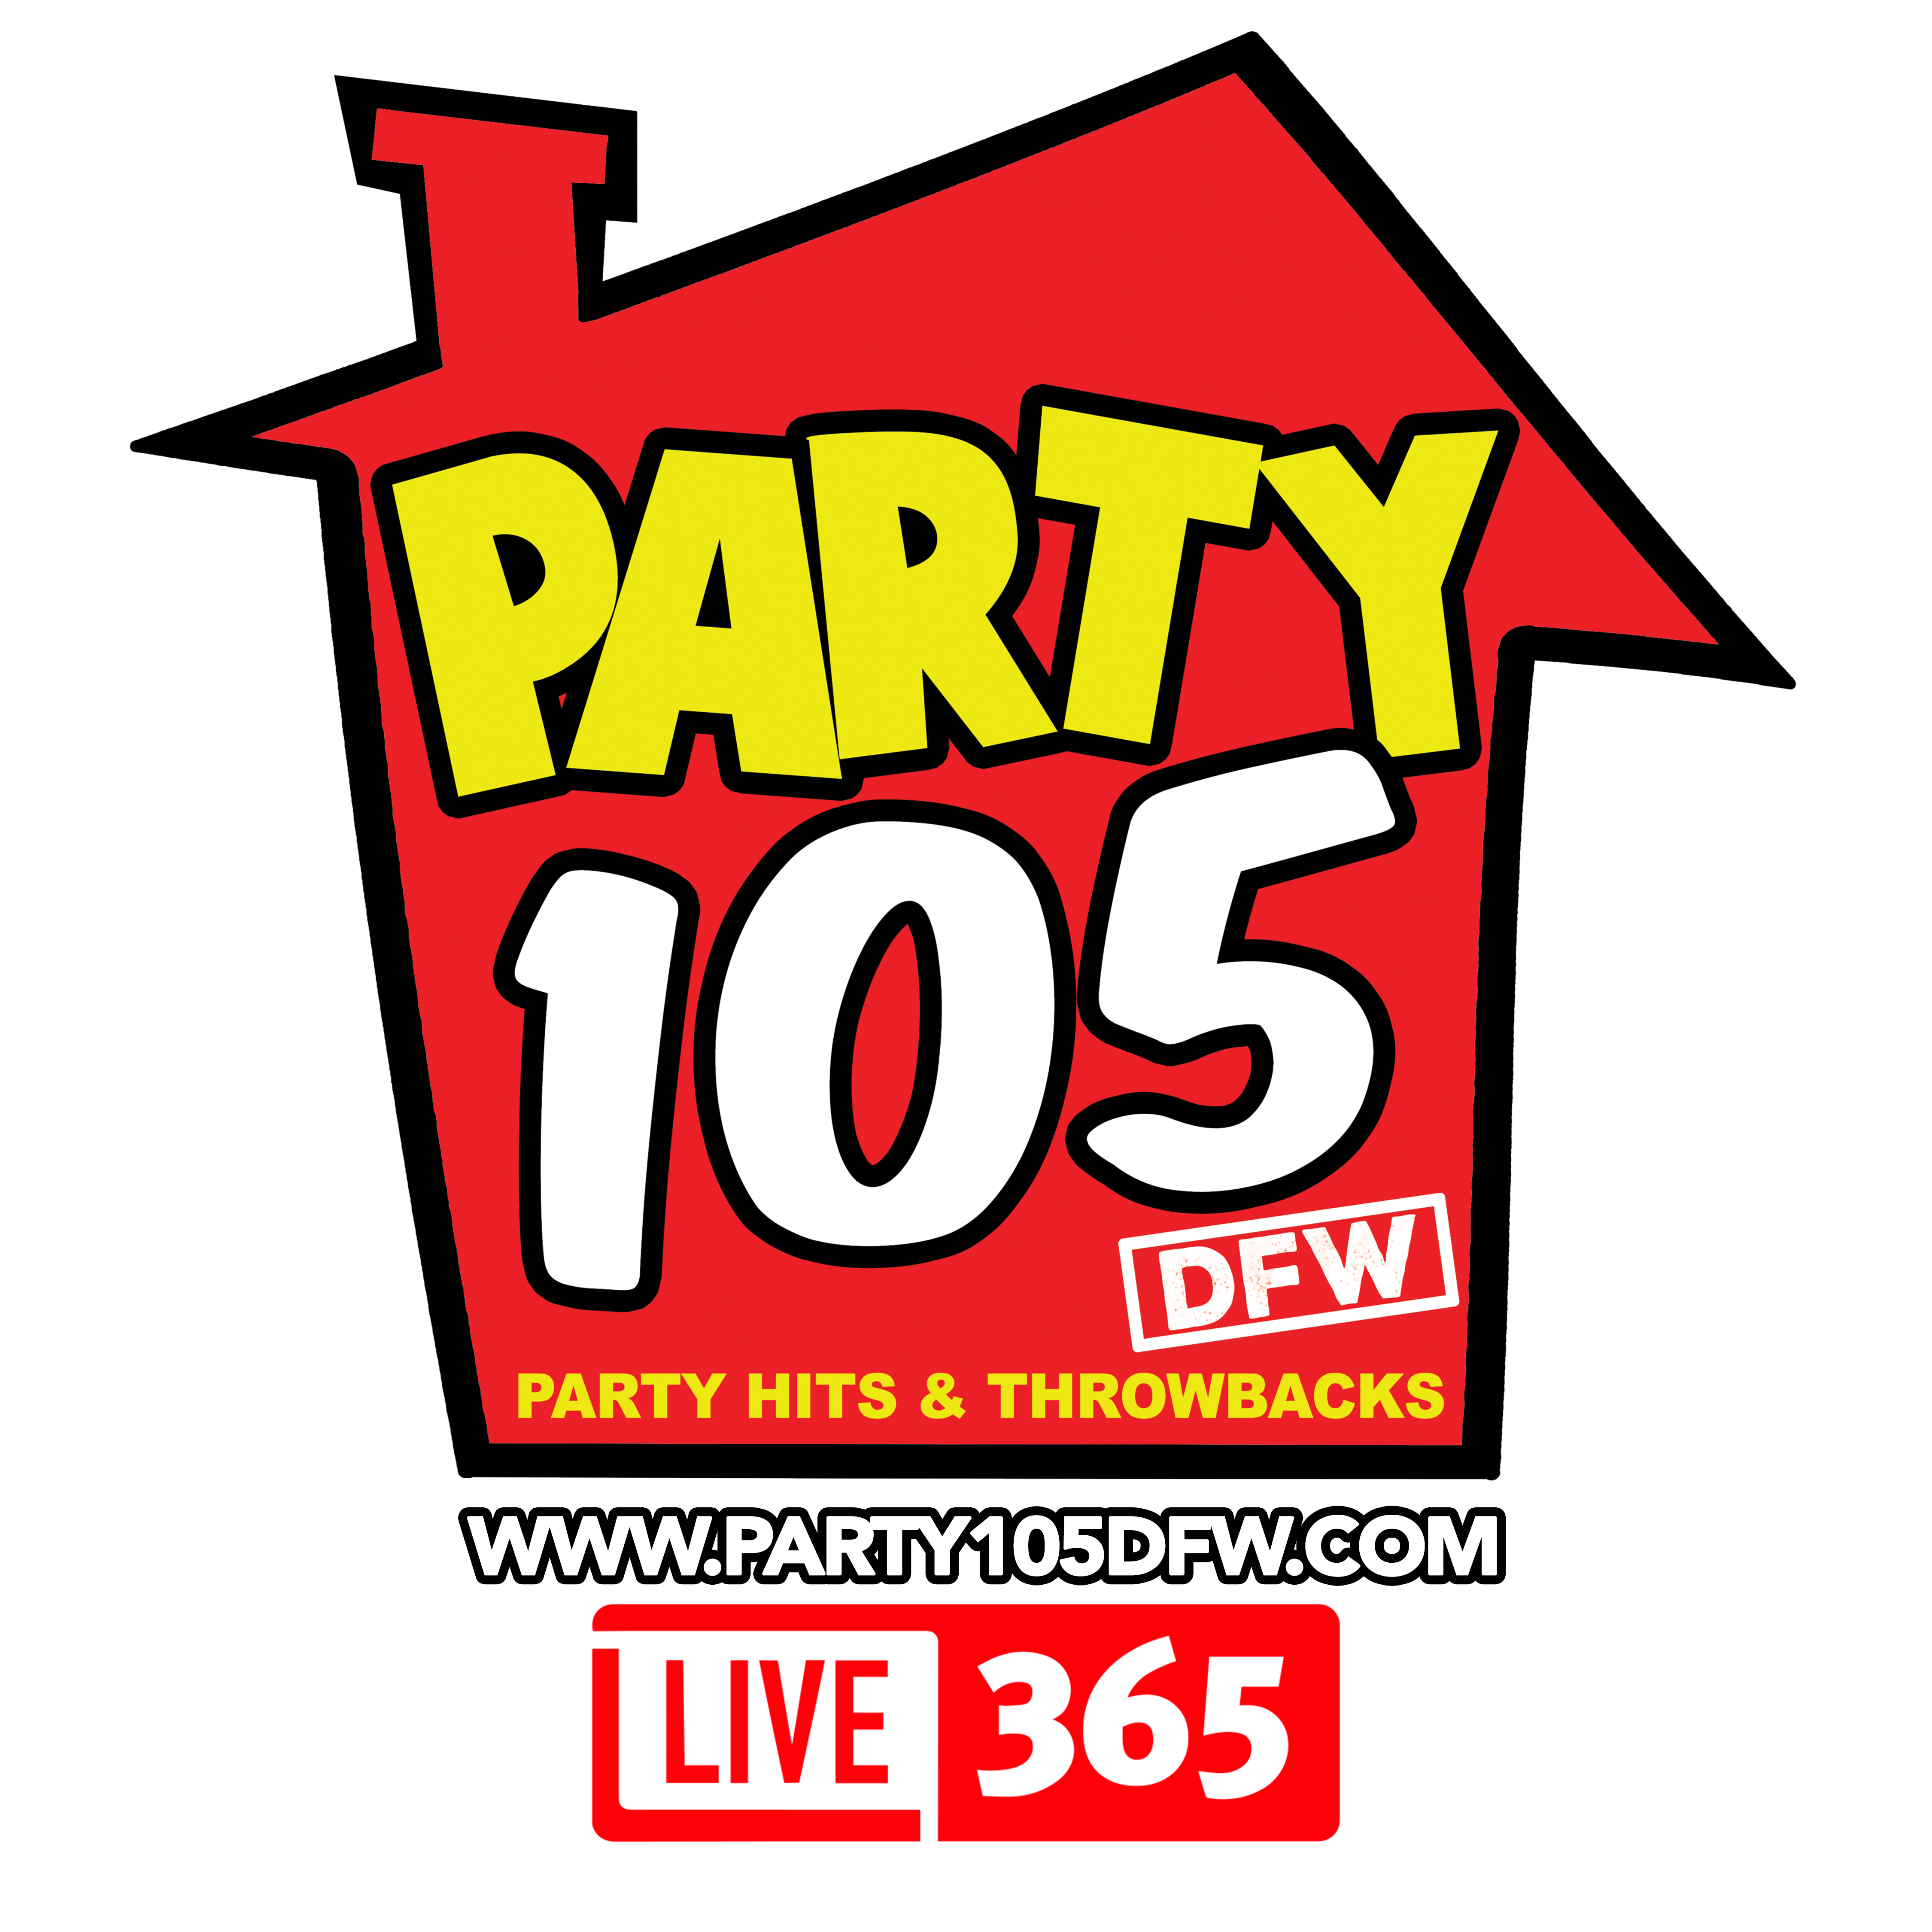 Art for PARTY 105 DFW Today's Hits y Mas @party105dfw by Alex Boom - @djalexboom Cinco De Mayo Booty Mix 5521